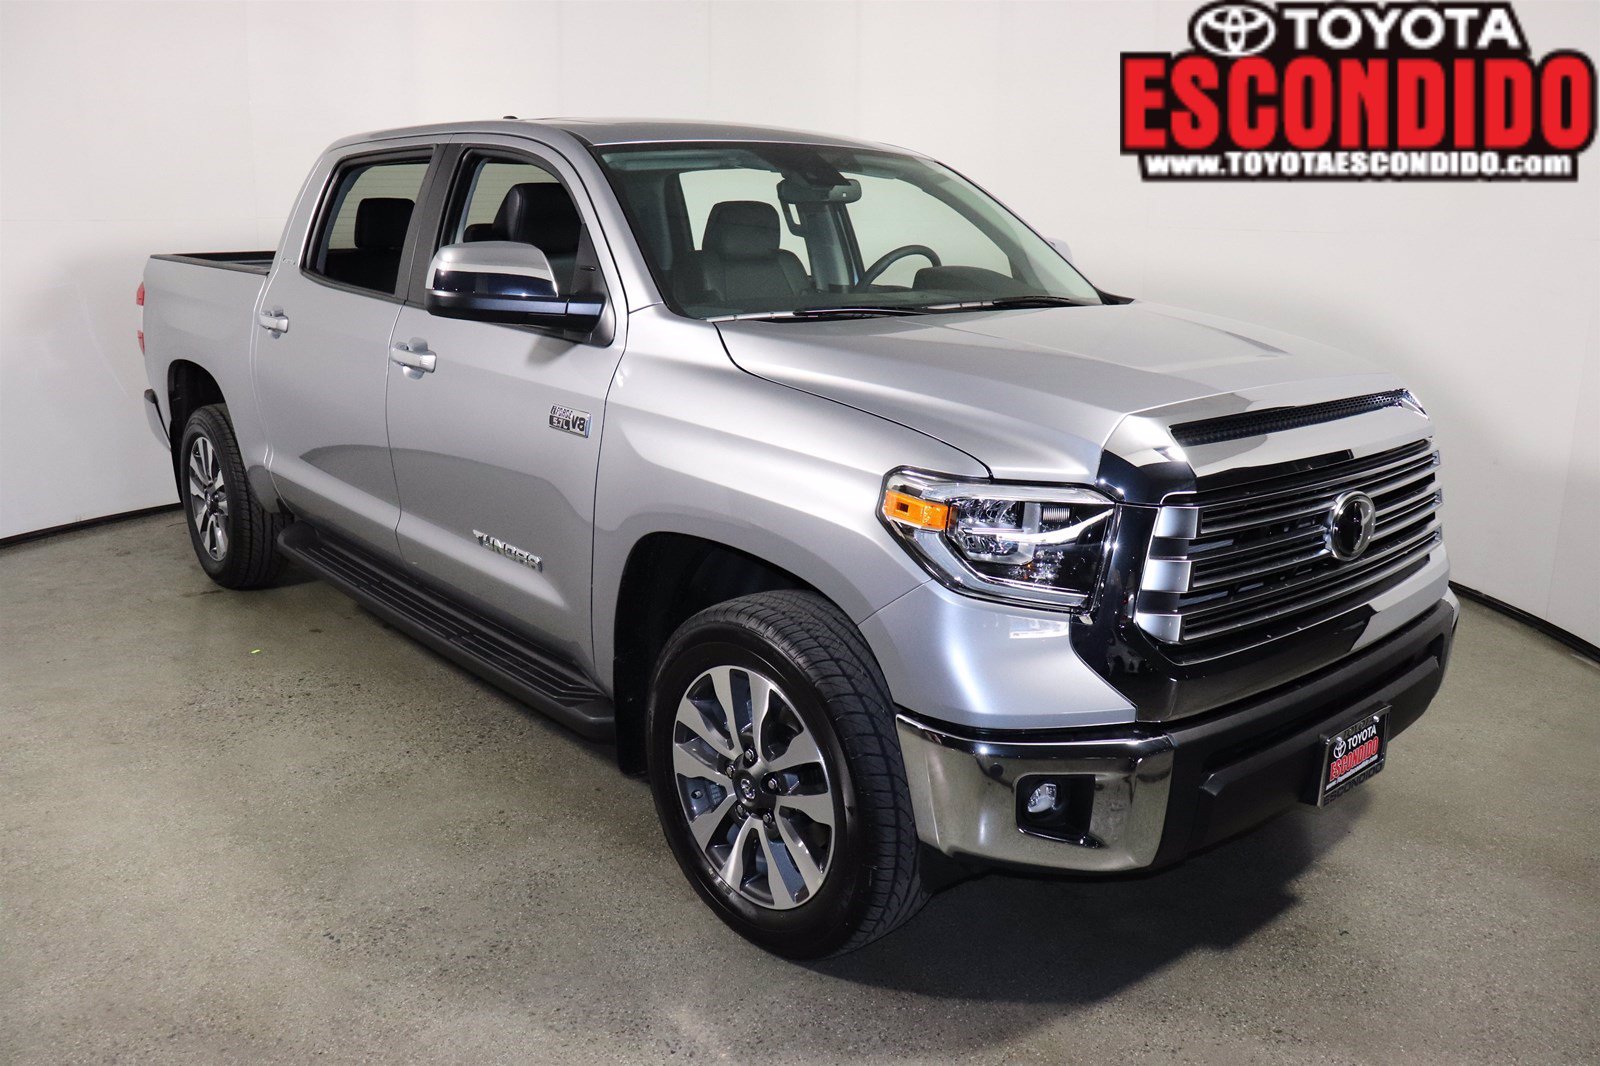 New 2020 Toyota TUNDRA Limited CrewMax Pickup in Escondido #1025590